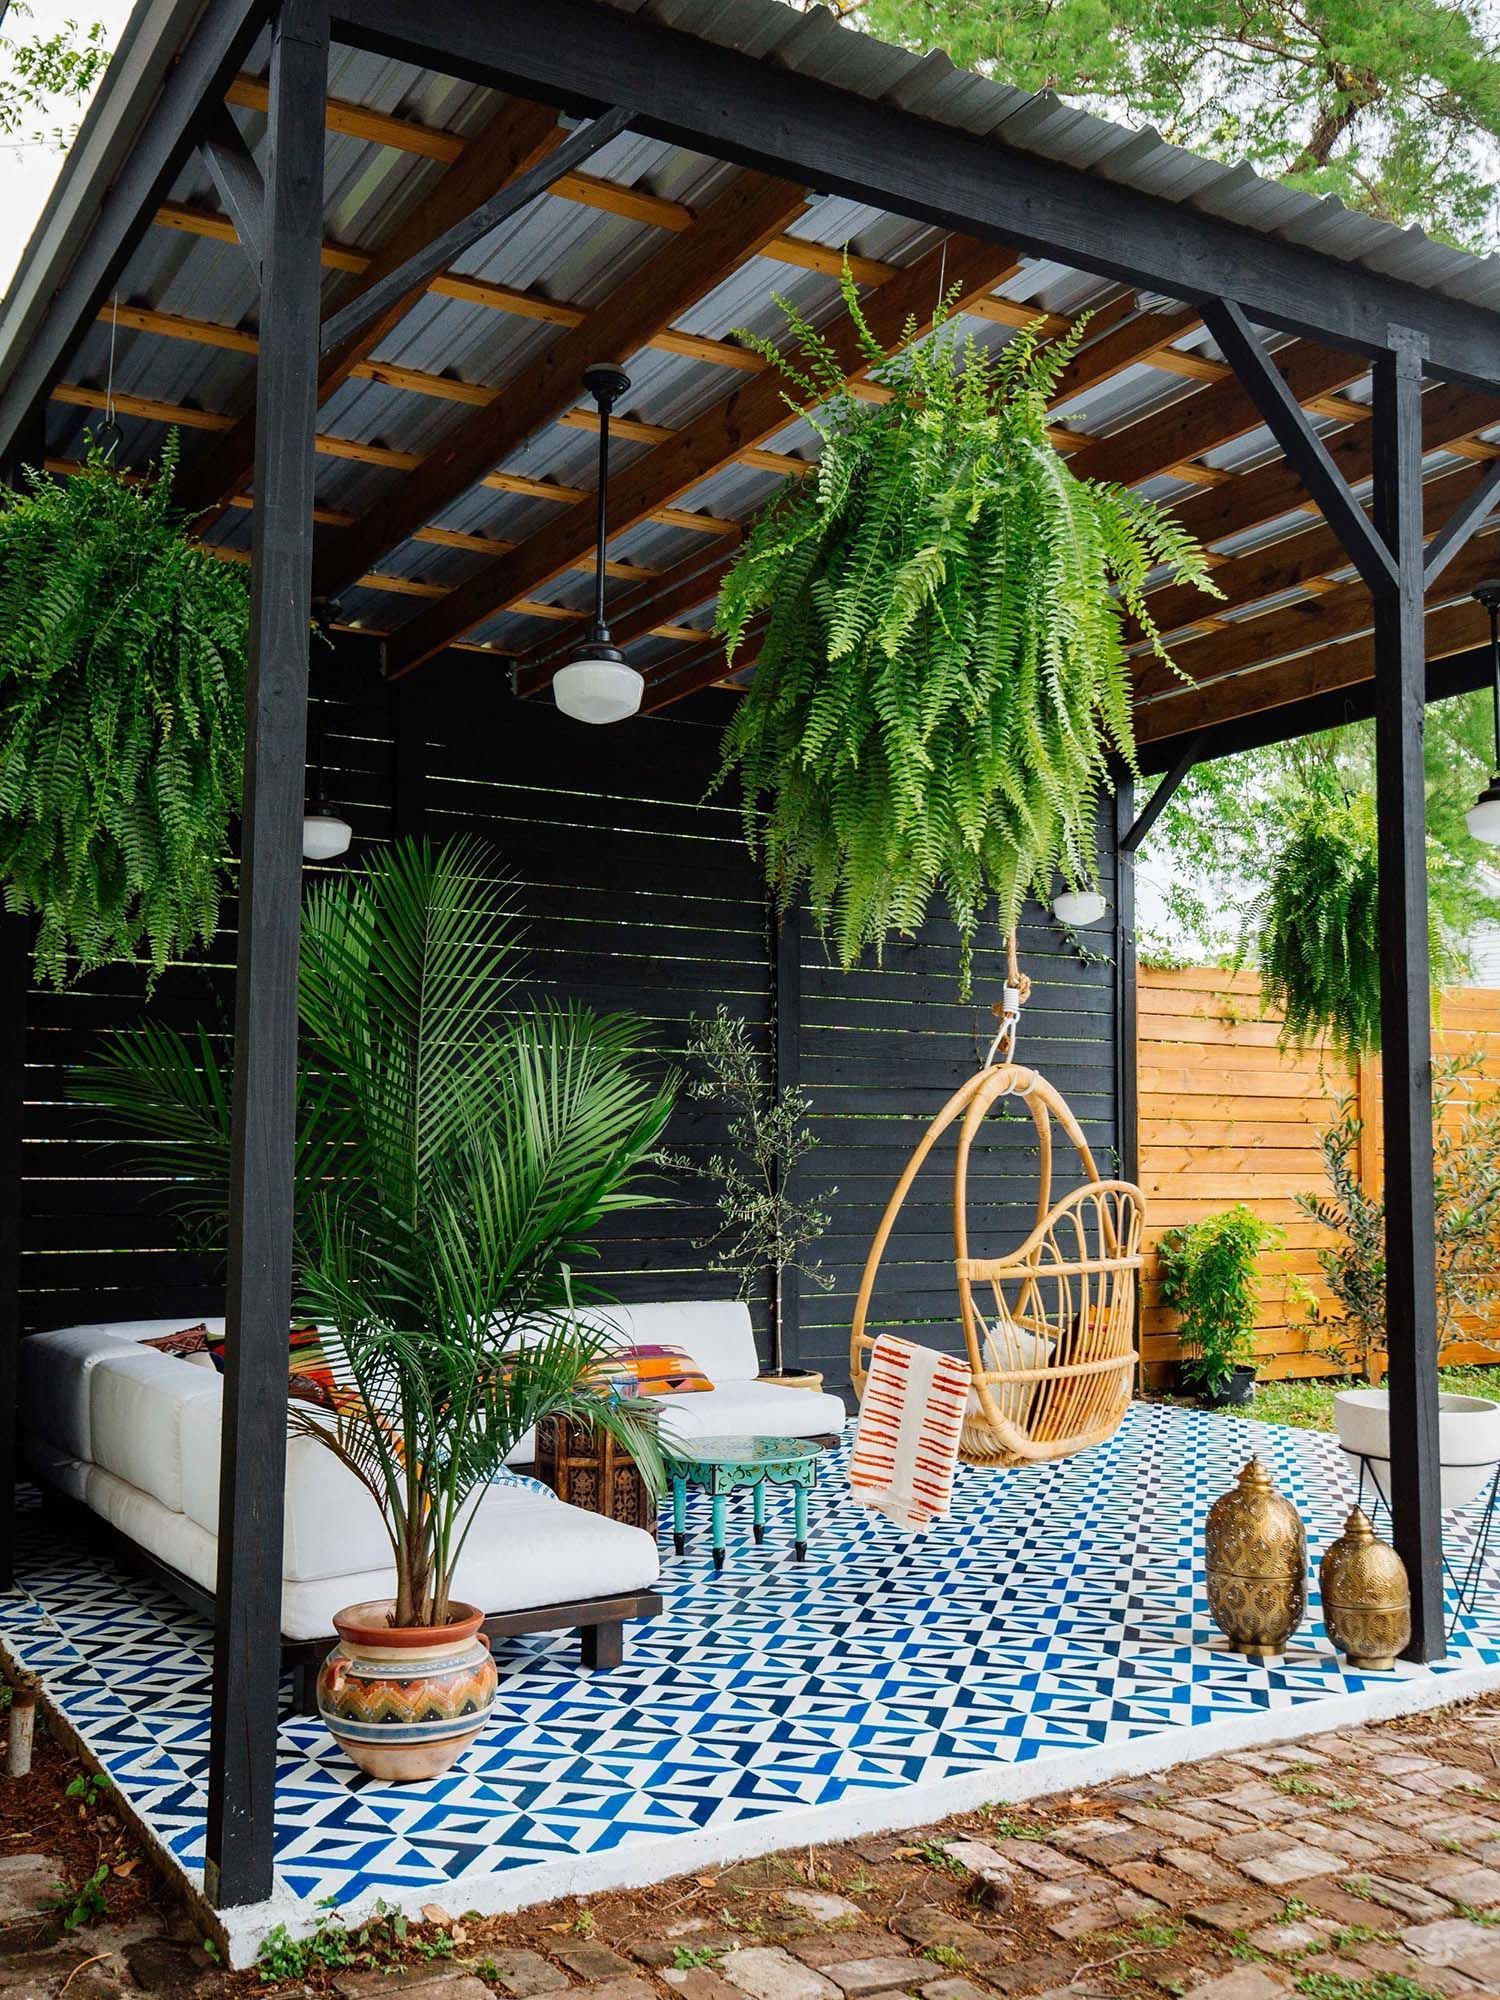 35 Brilliant and inspiring patio ideas for outdoor living and entertaining -   14 planting Room outdoor ideas